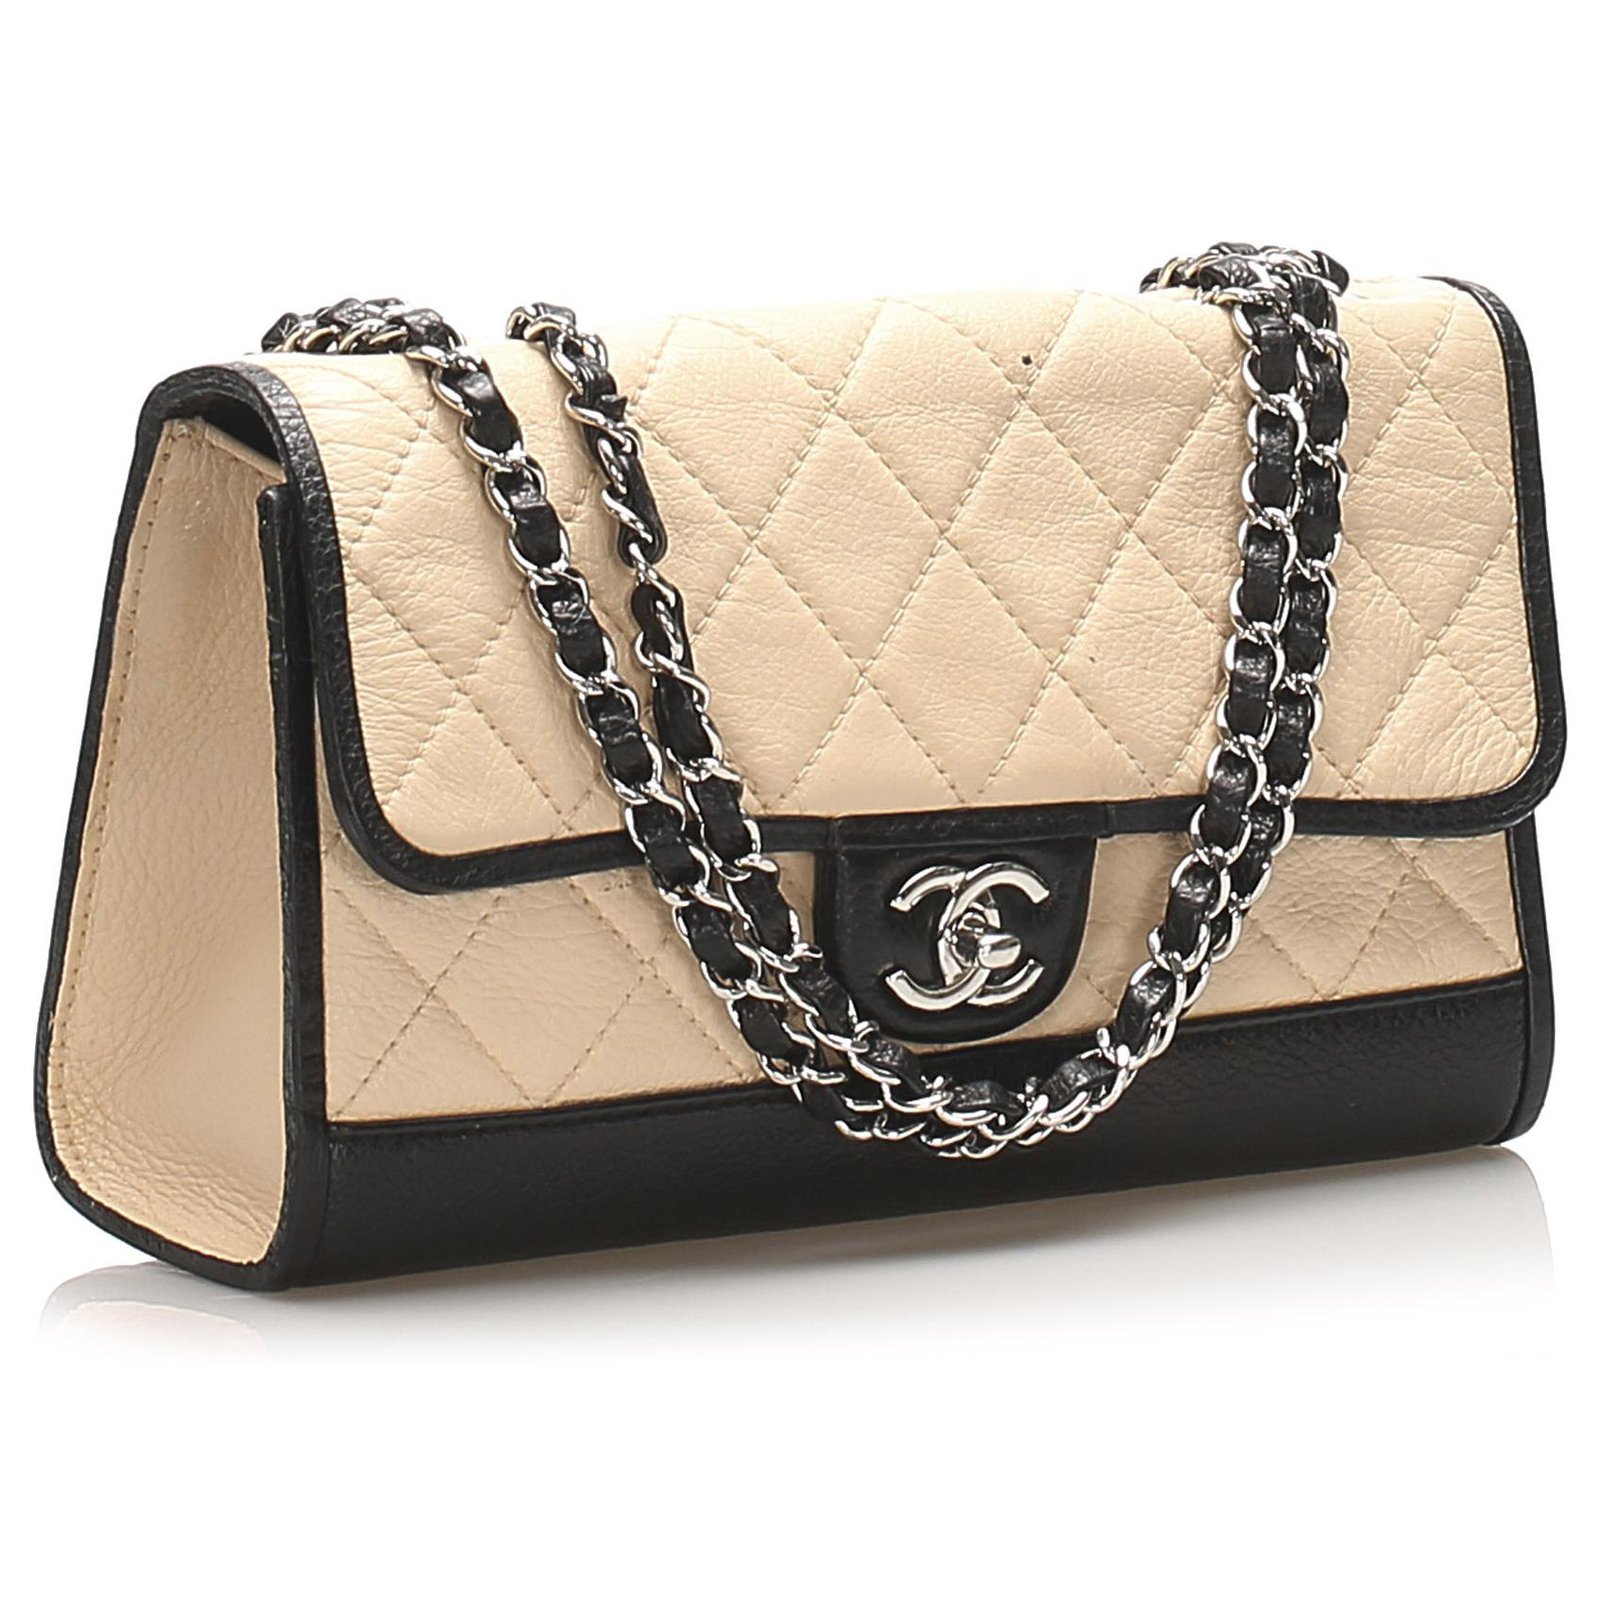 Chanel Brown Quilted CC Single Flap Leather Shoulder Bag